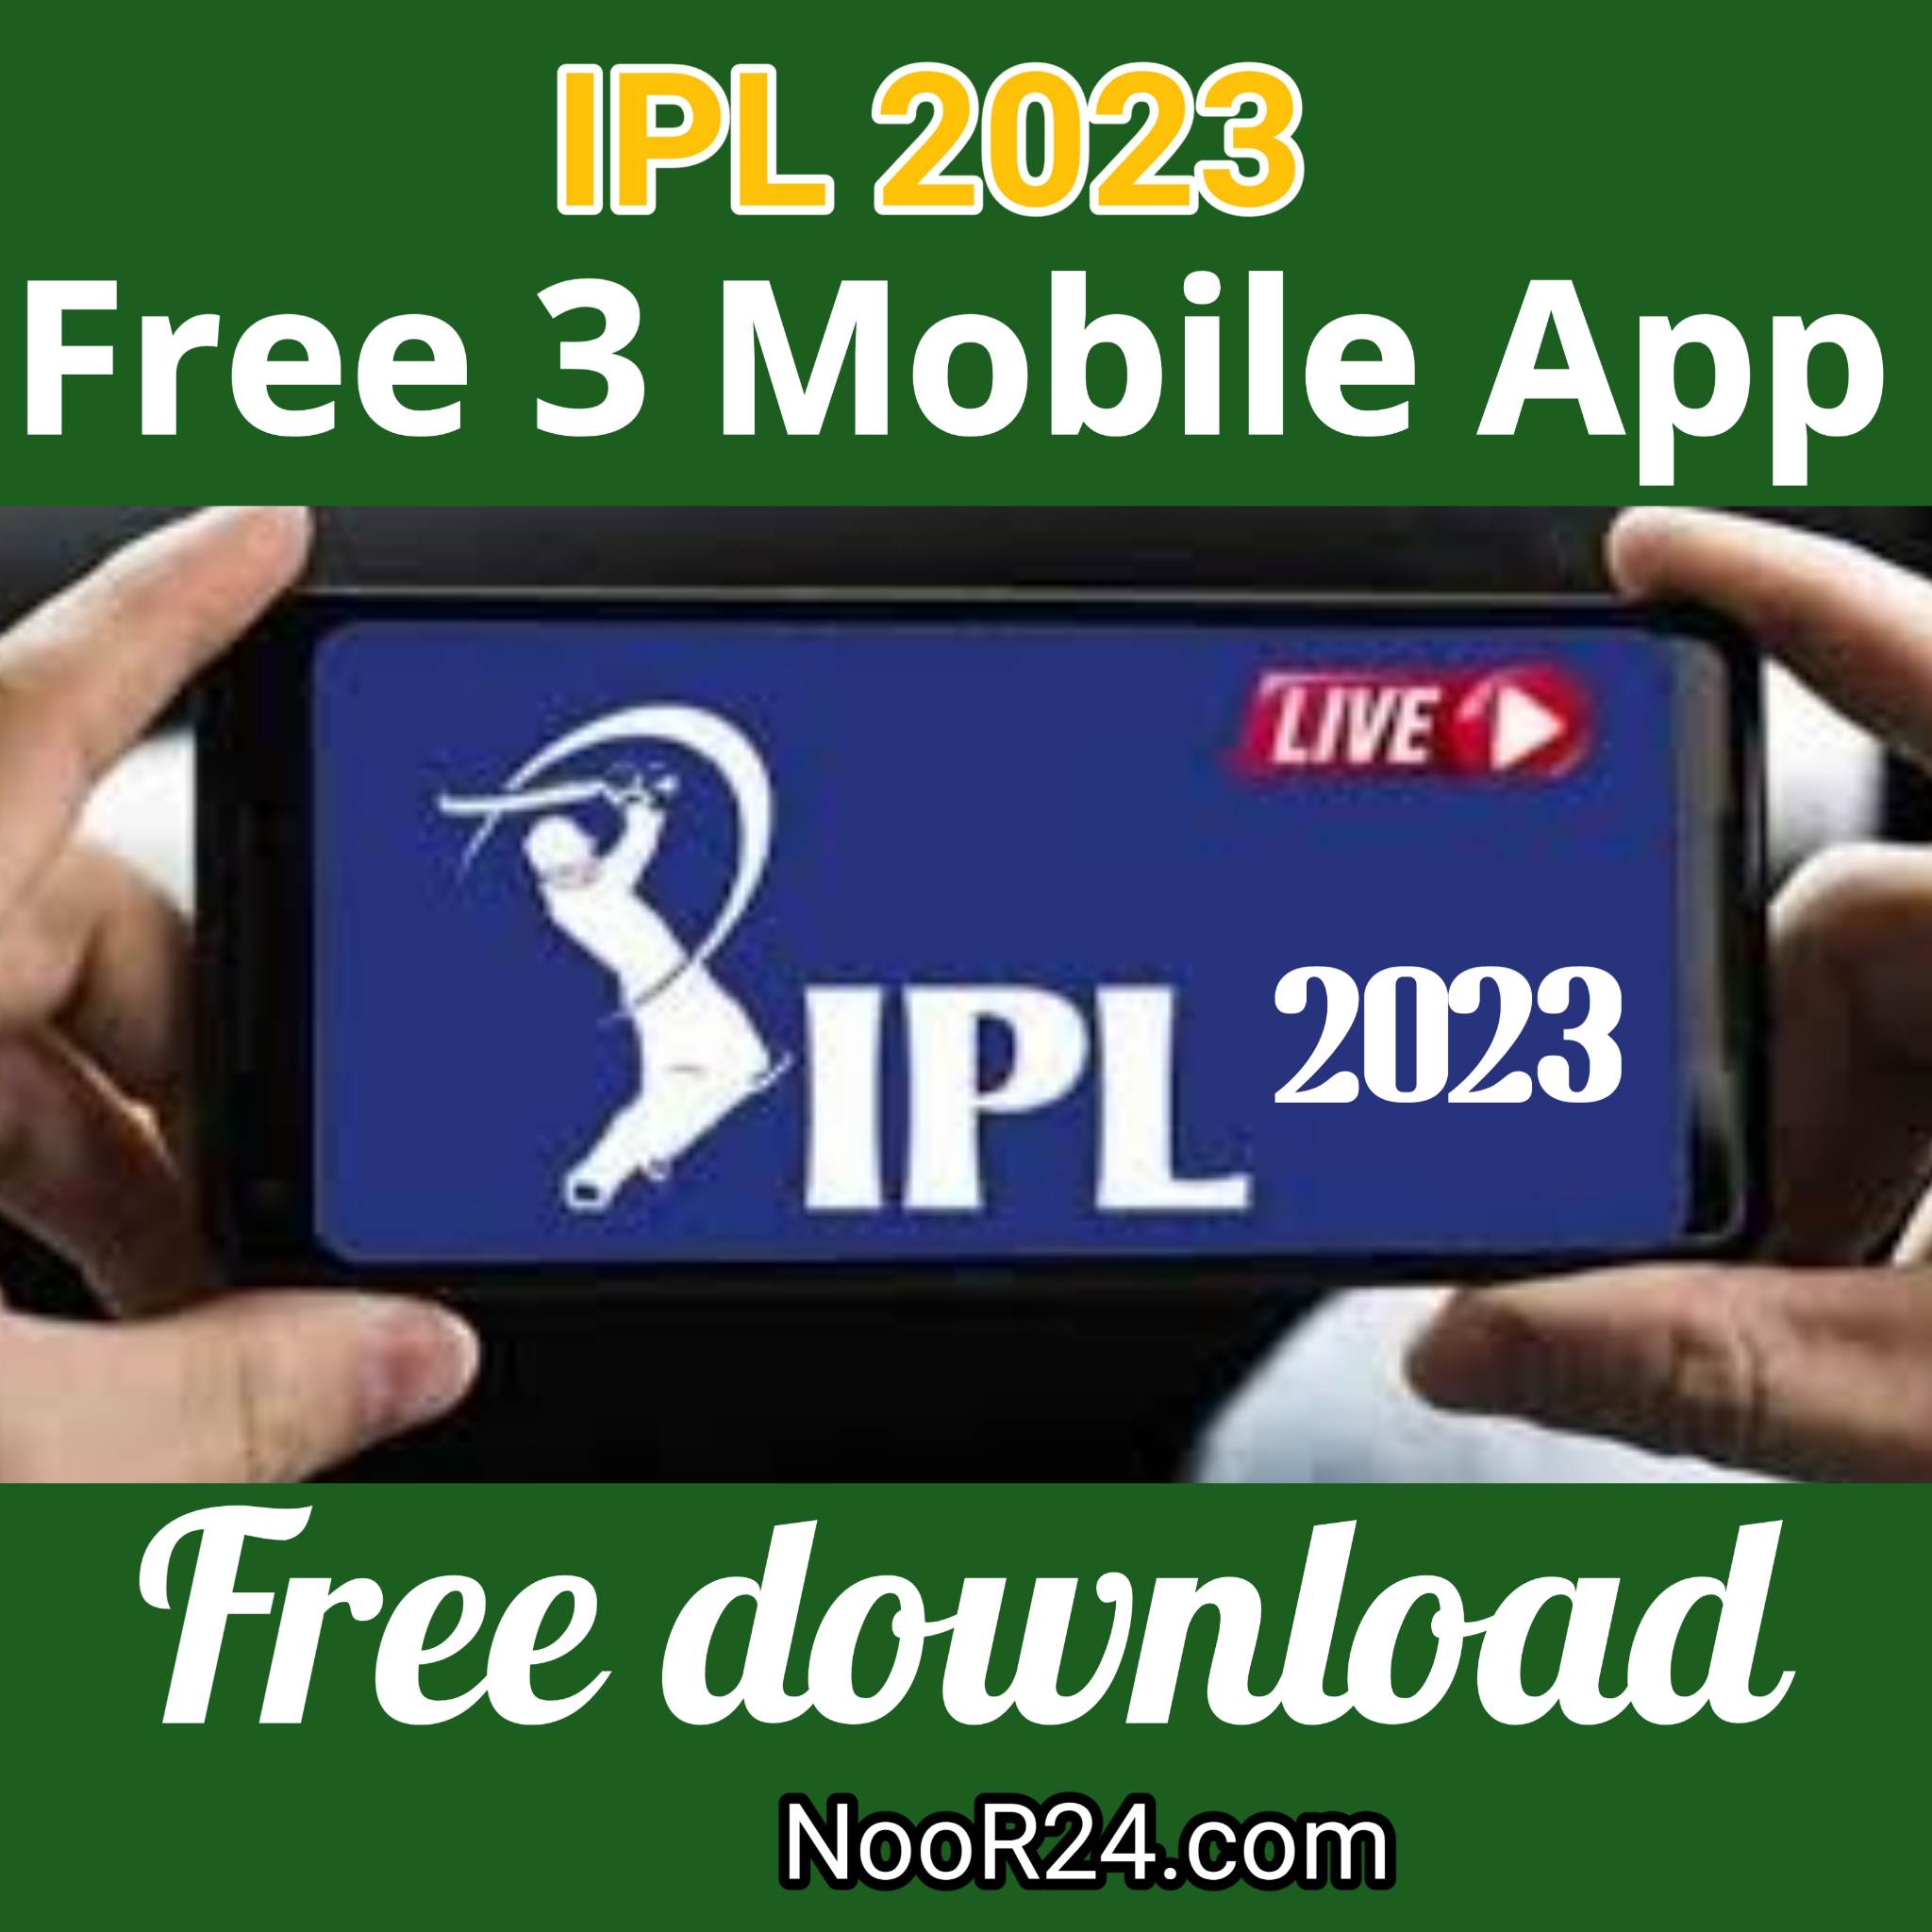 3 Free Live Apps to Watch IPL 2023 Live on Mobile